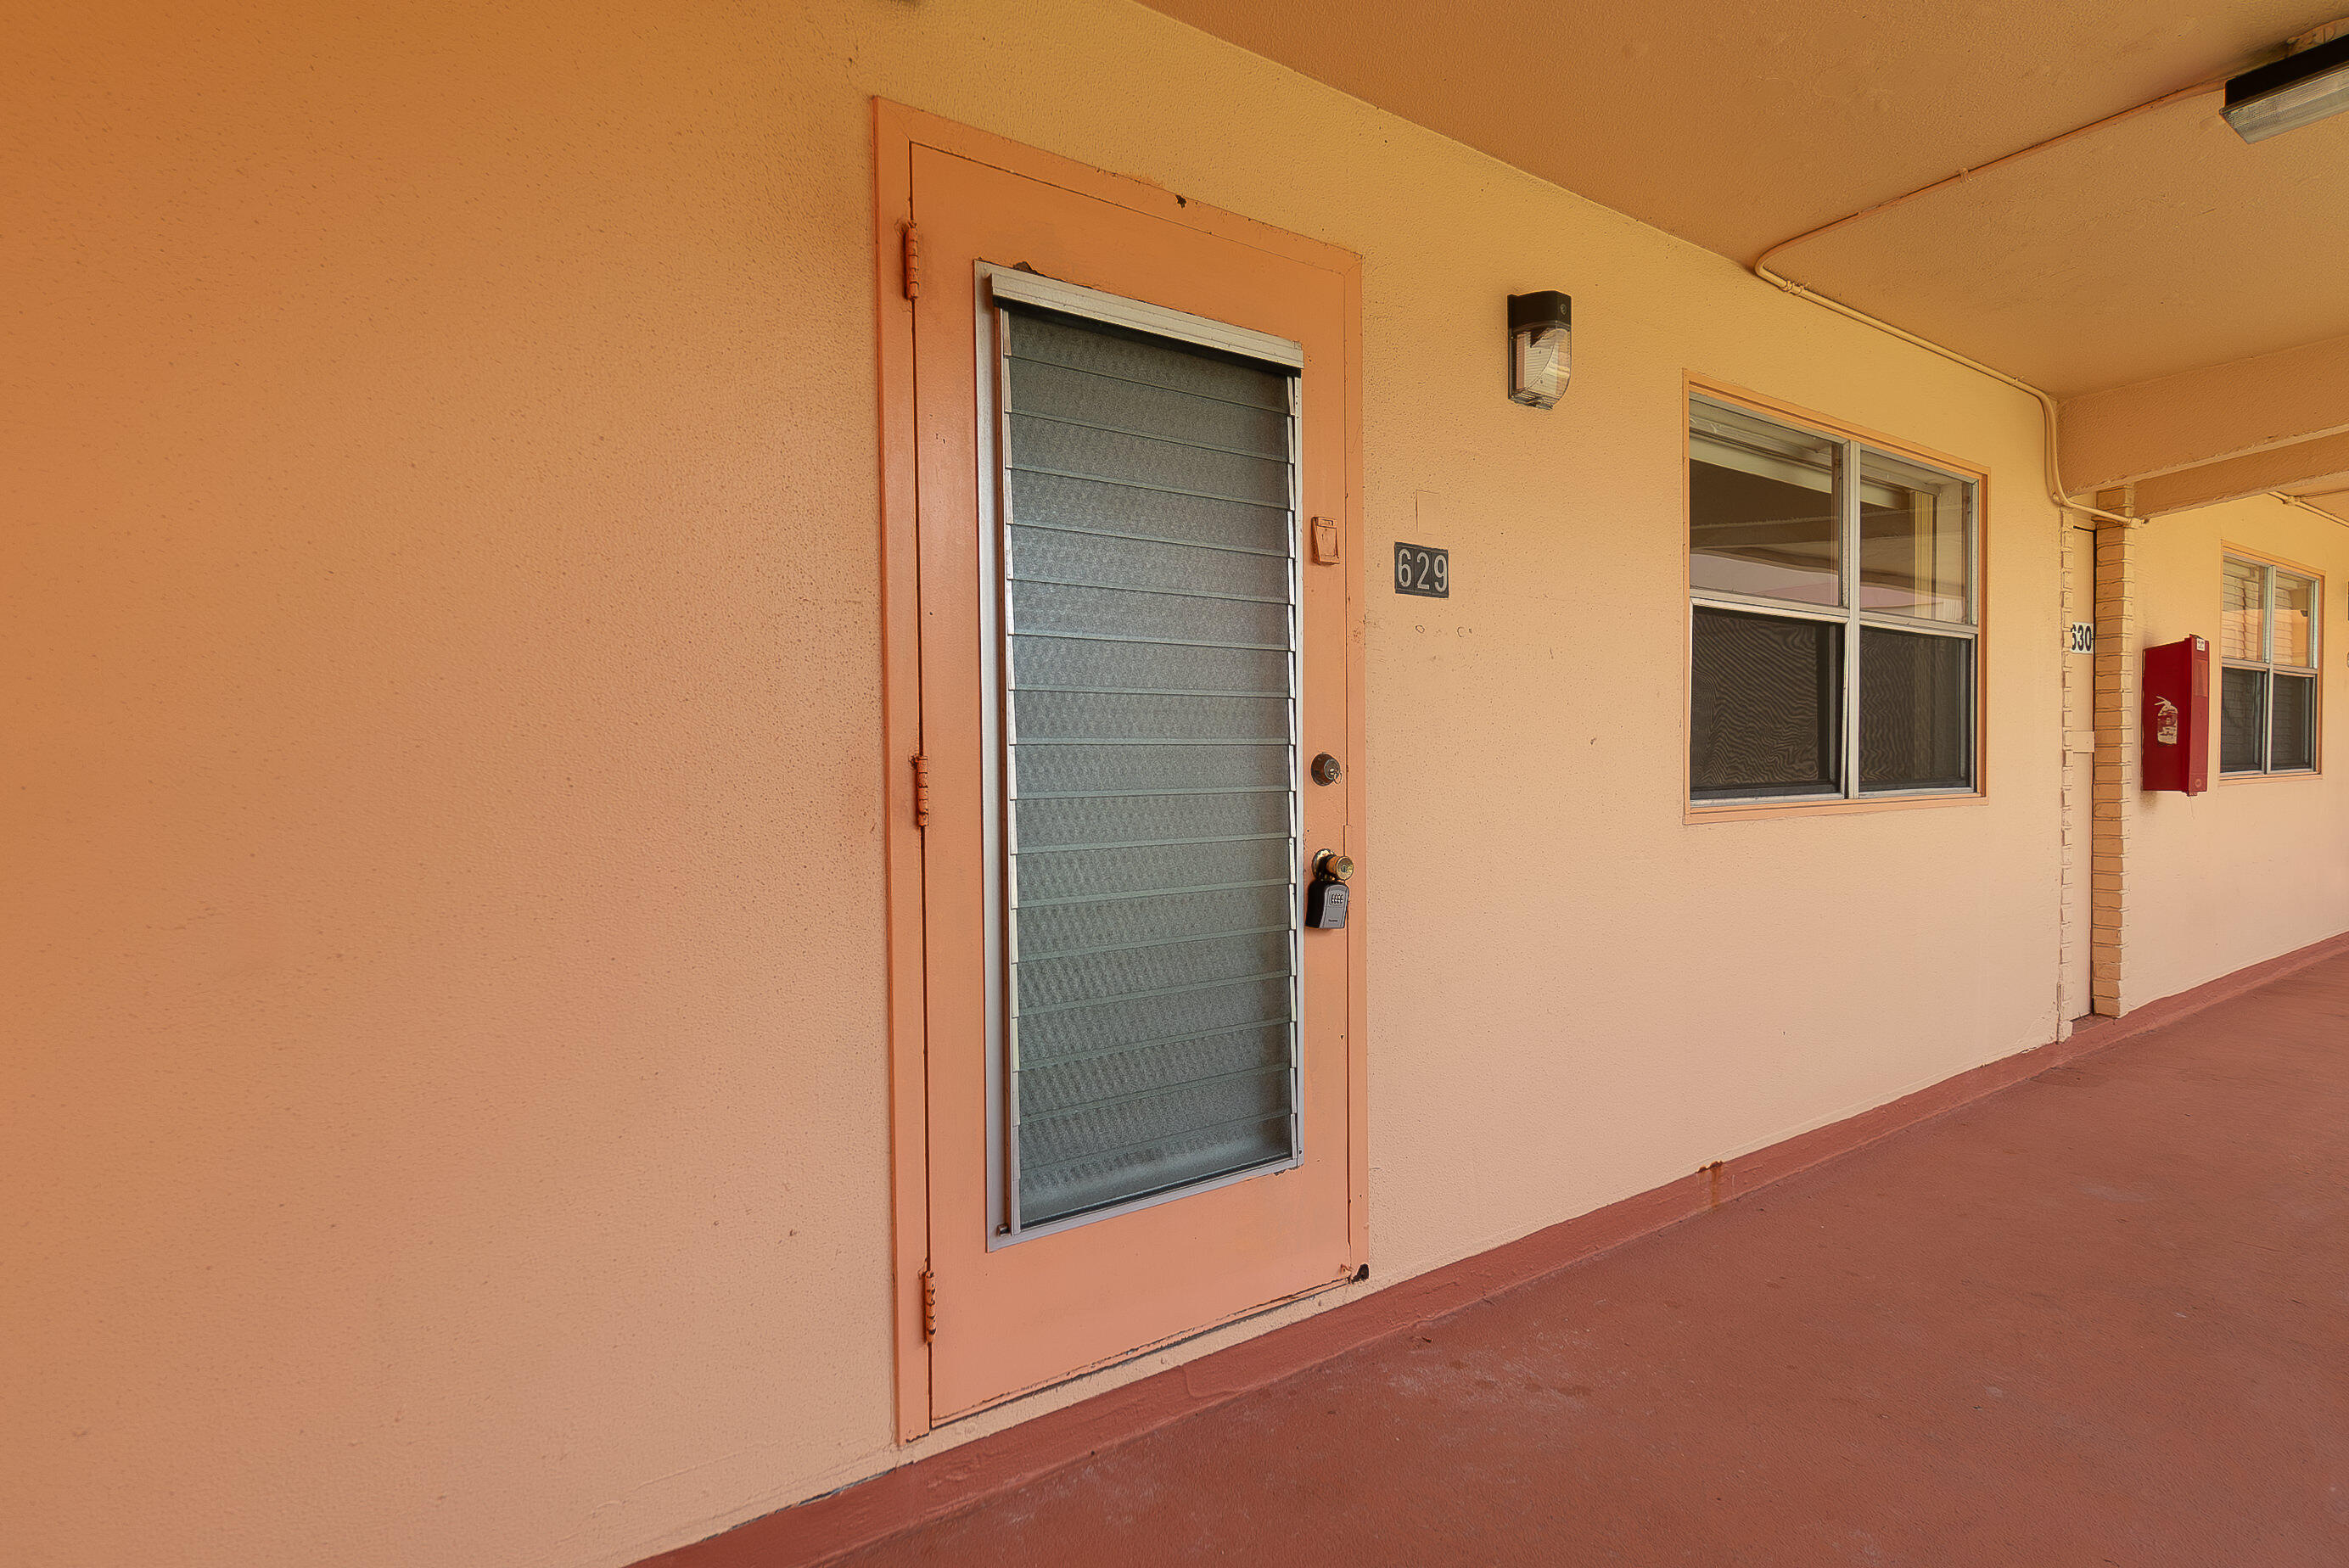 Property for Sale at 629 Saxony Lane, Delray Beach, Palm Beach County, Florida - Bedrooms: 2 
Bathrooms: 2  - $119,000